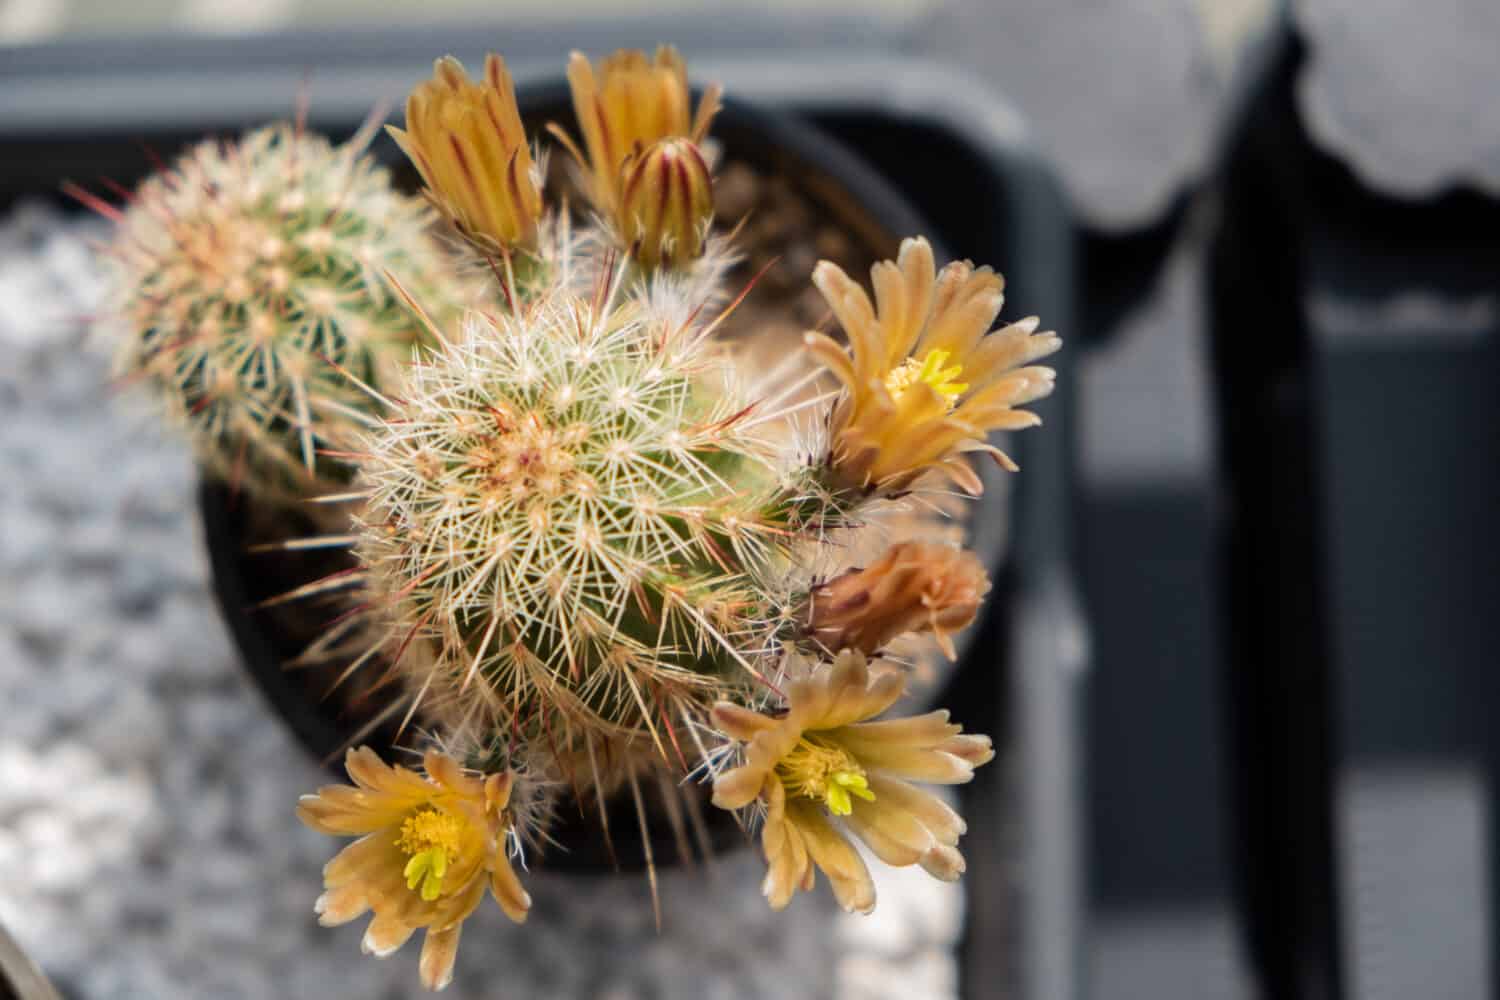 Close up of cactus (Echinocereus Chloranthus) with yellow flowers in a flowerpot